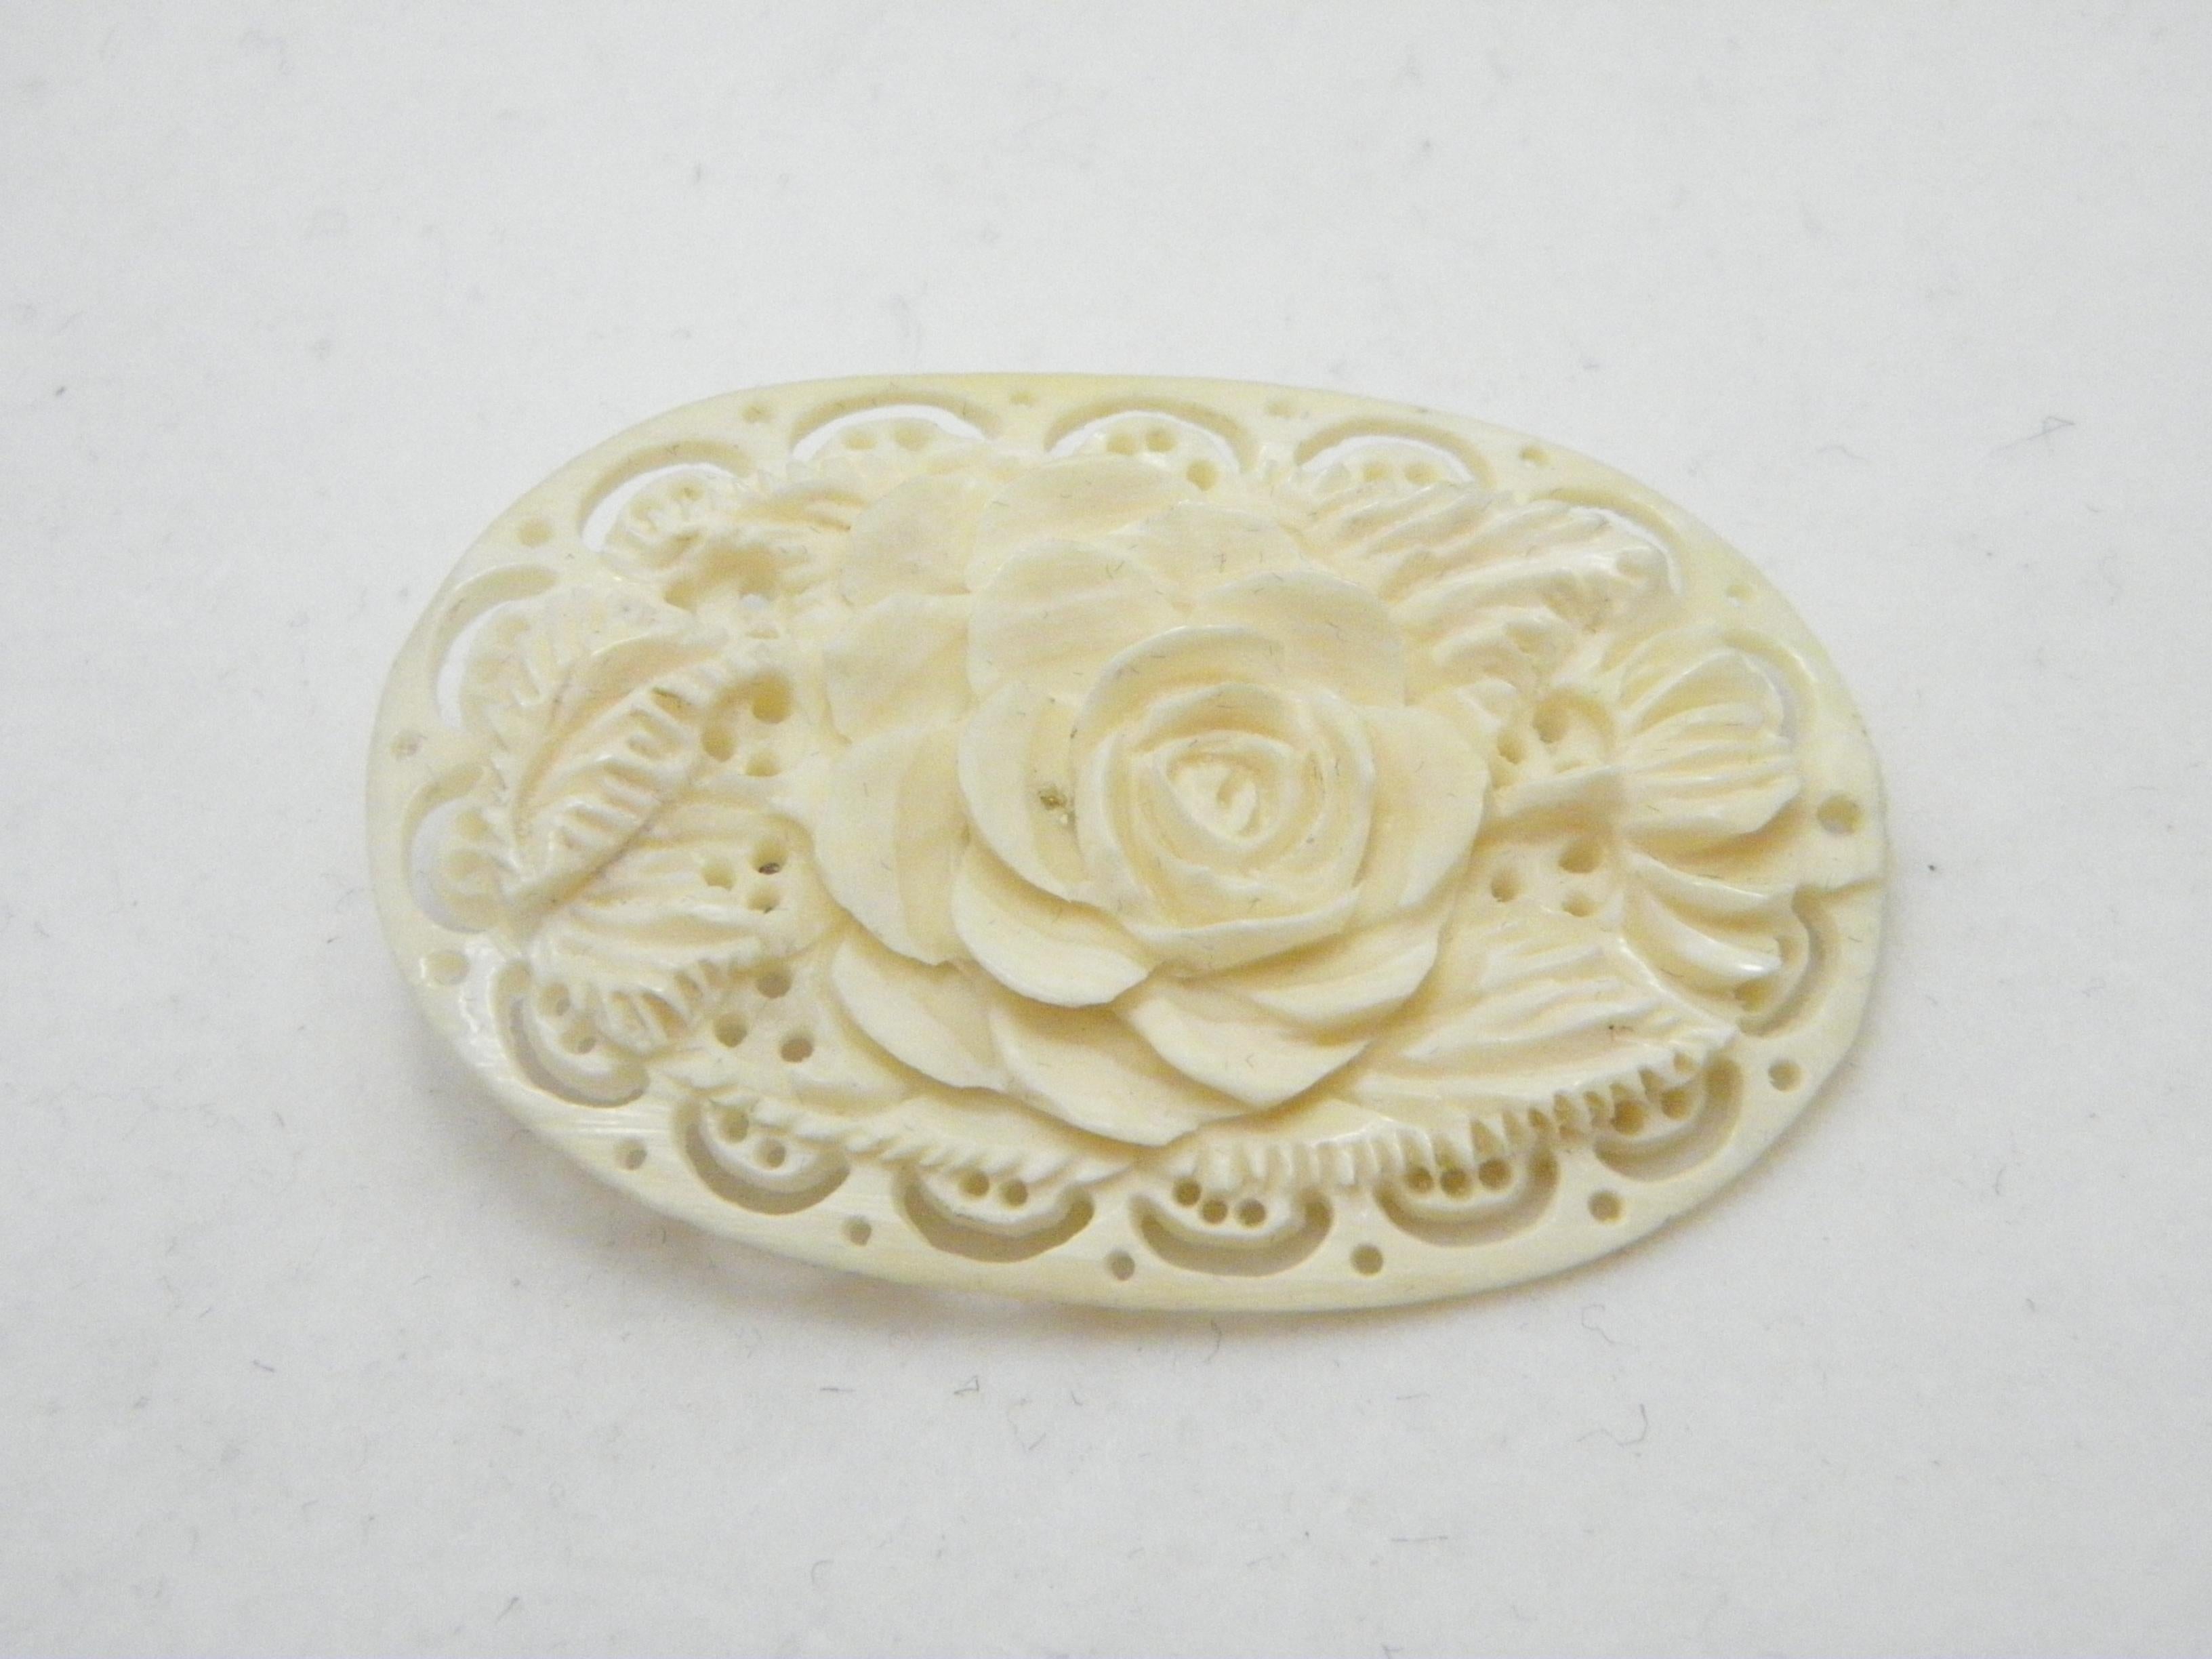 If you have landed on this page then you have an eye for beauty.

On offer is this gorgeous

9CT GOLD HAND CARVED BONE ROSE FLORAL BROOCH

DETAILS
Material: 9ct (375/000) Solid Yellow Gold
Style: Hand carved bone (probably Ox) in floral